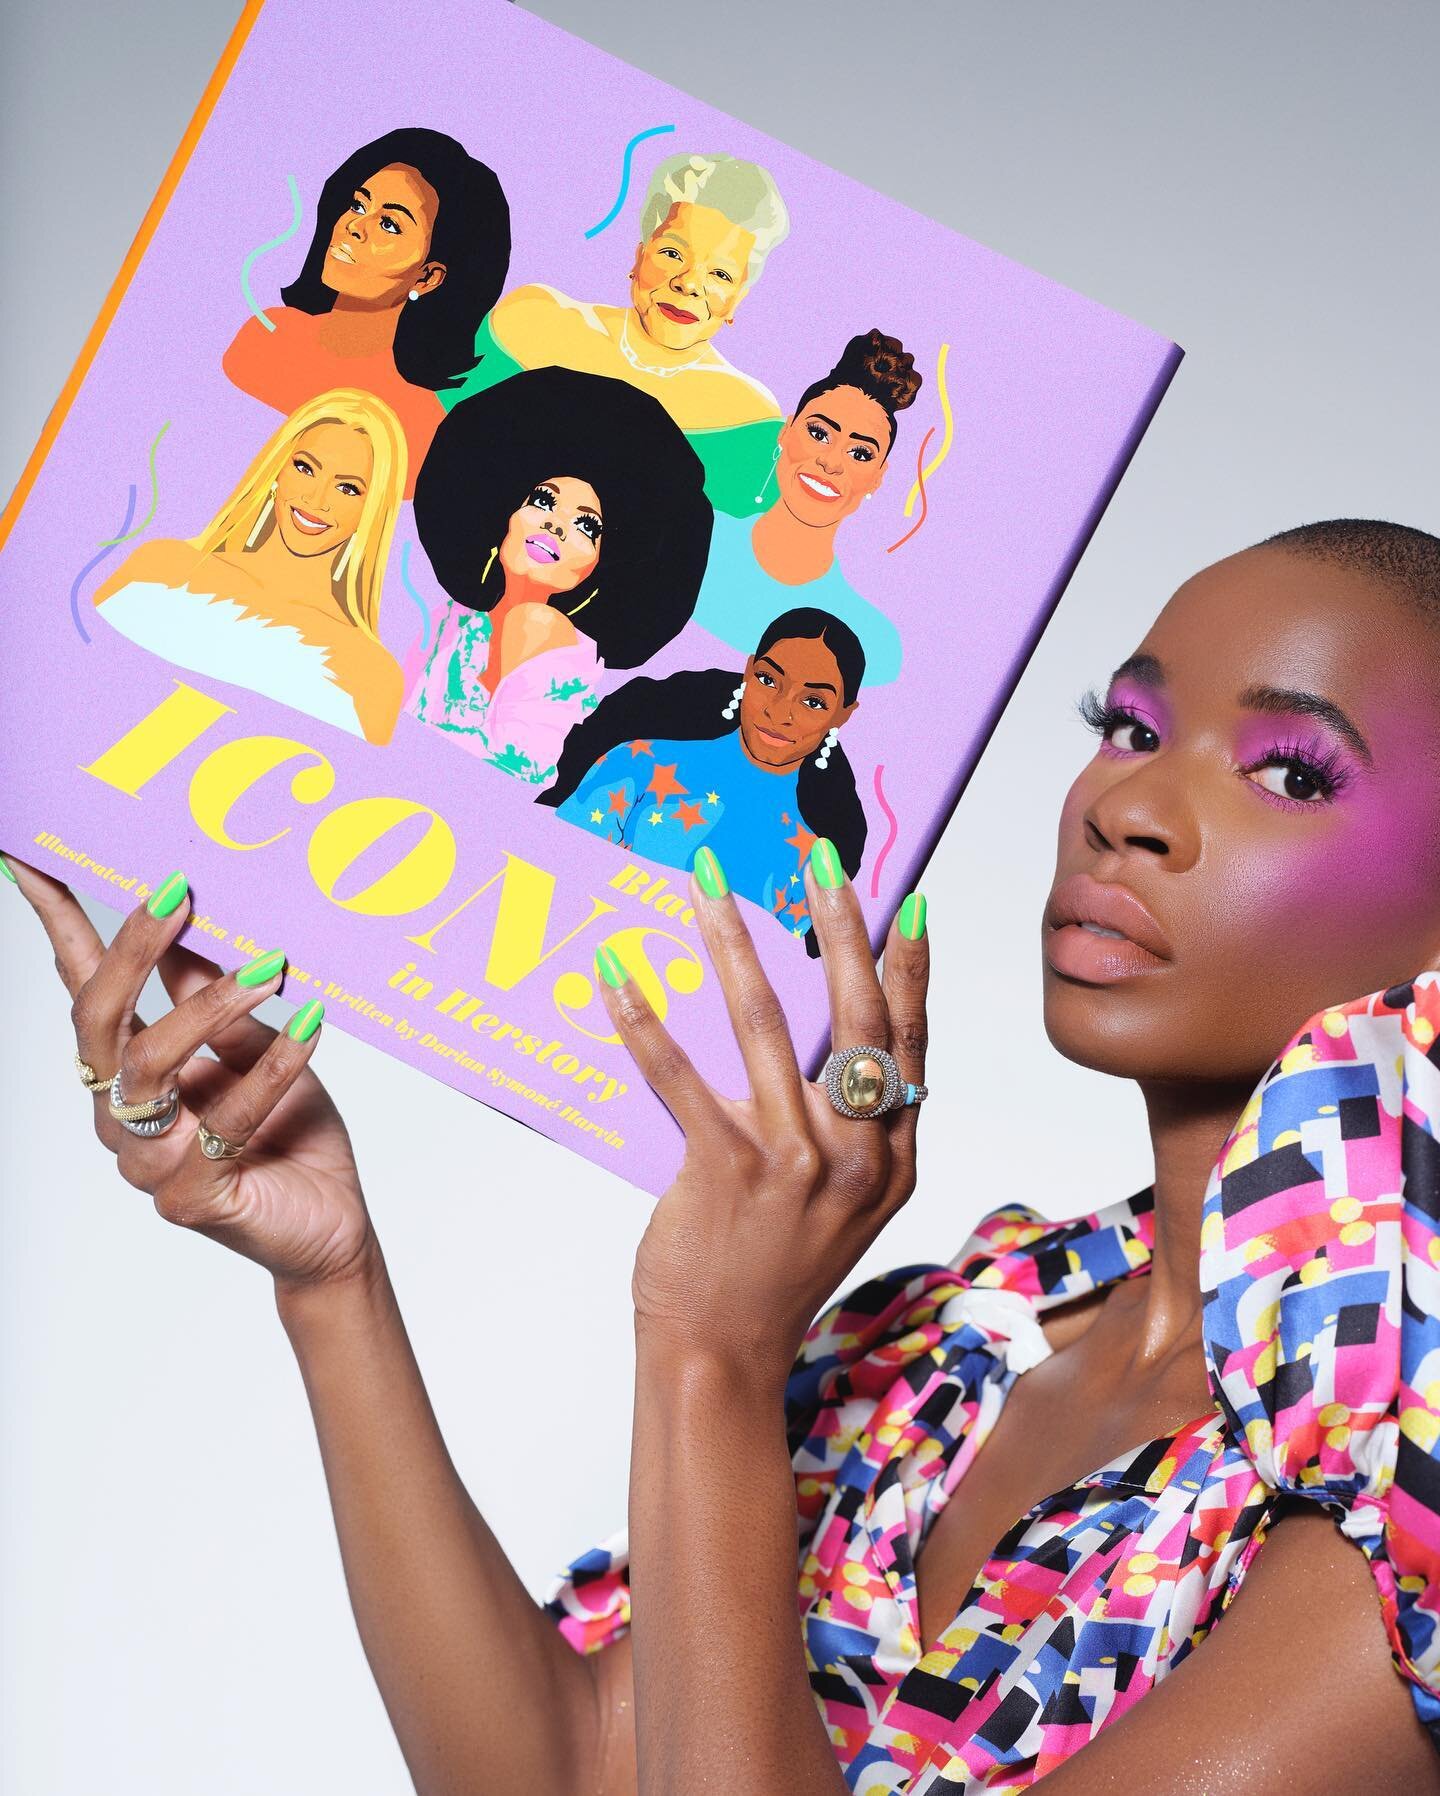 some girl holding the Black ICONS in Herstory book @chroniclechroma @chroniclebooks 📚

📸: @meech213 
💄: @muaalexx 
Production: @monicaahanonu / @flydhalsim